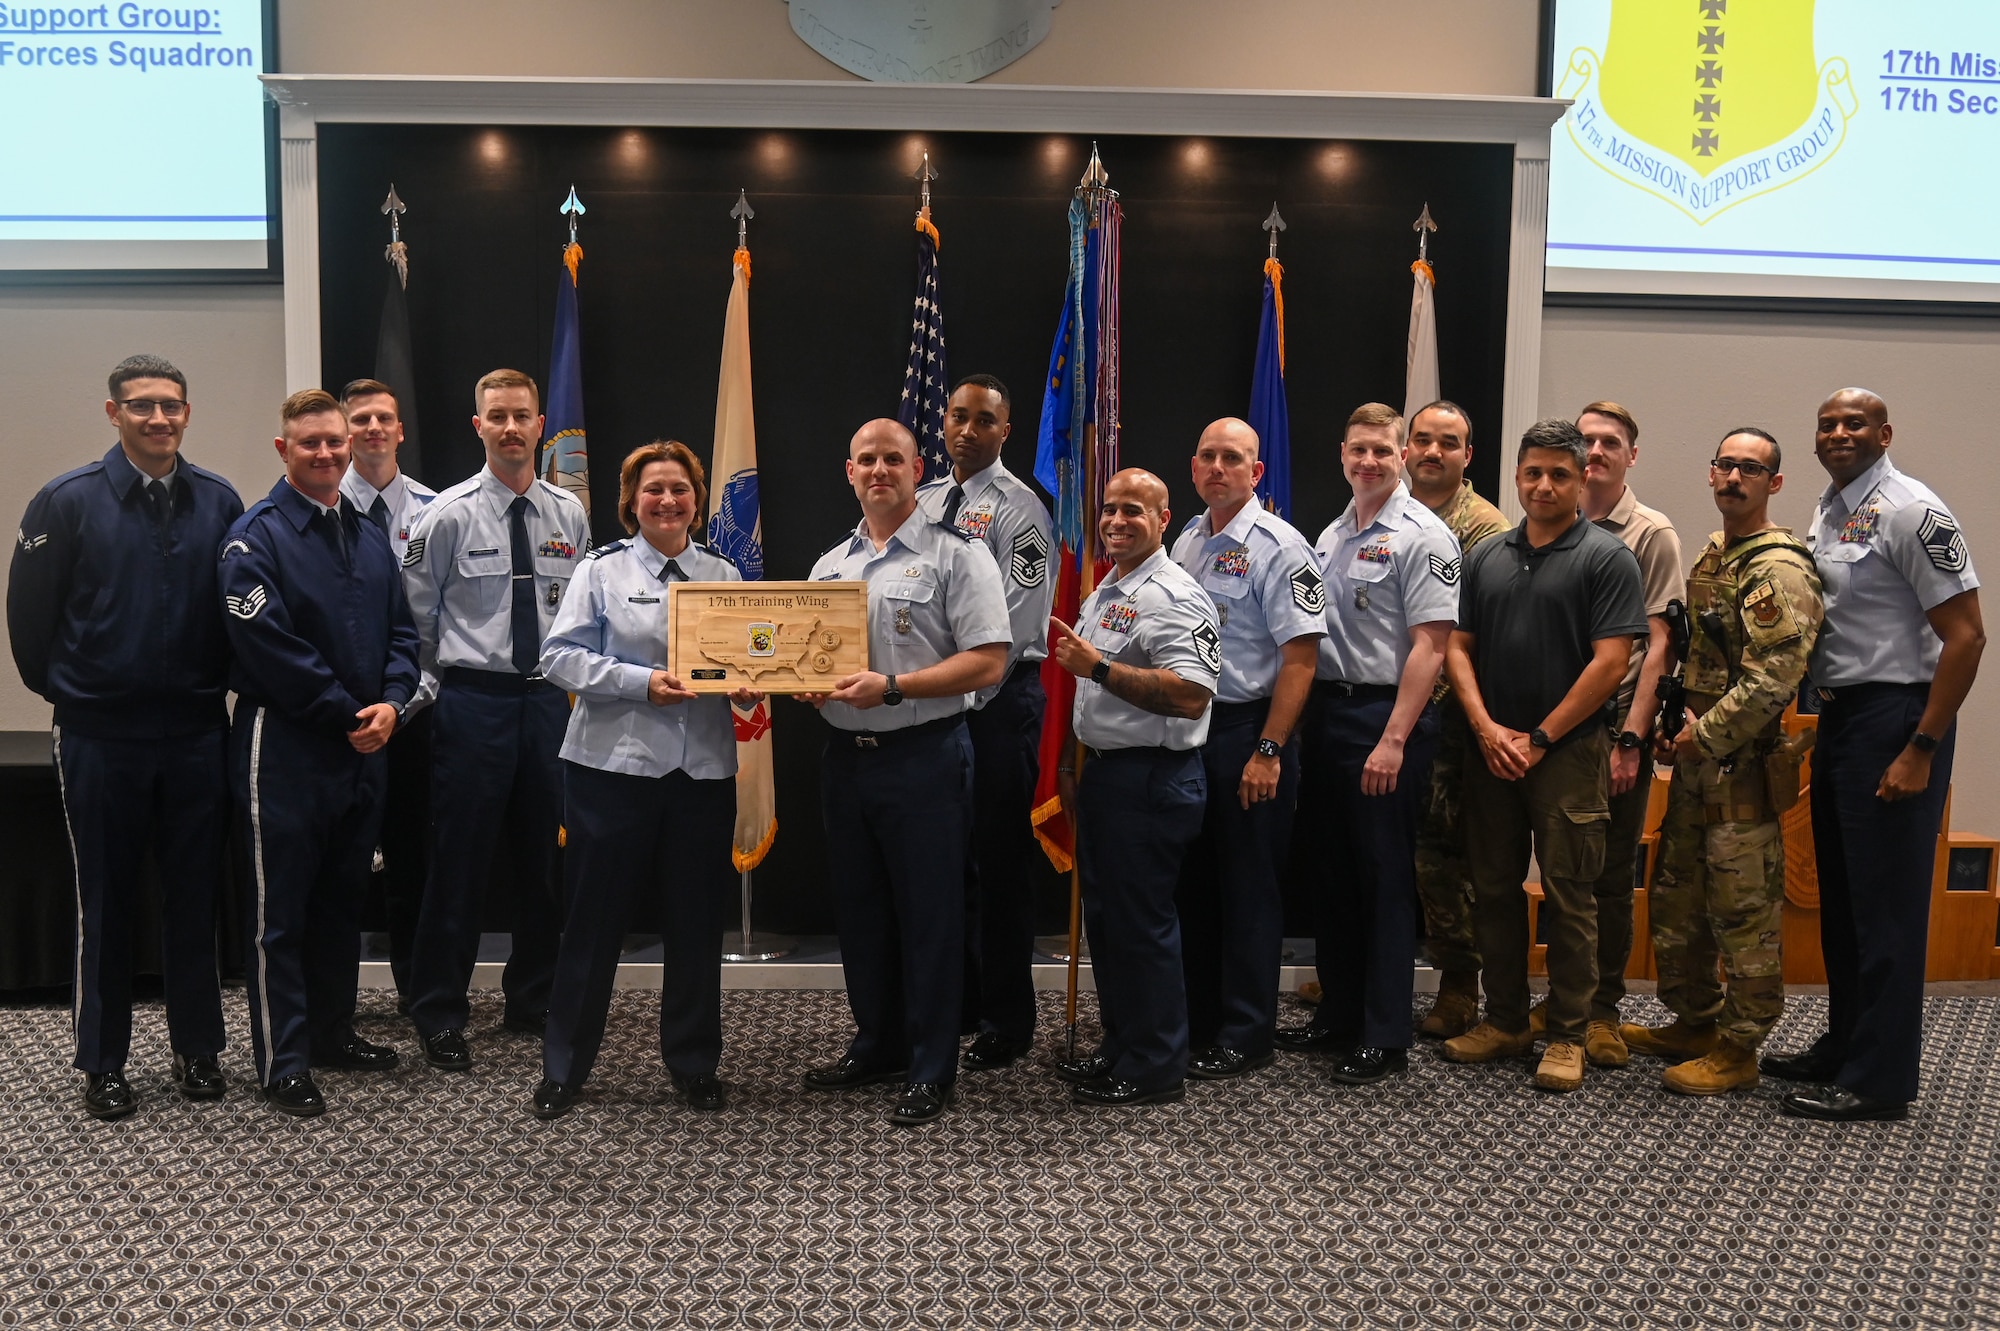 17th Security Forces Squadron defenders pose with U.S. Air Force Col. Angelina Maguinness, 17th Training Wing commander, and Chief Master Sgt. Derrick Sherrod, 17th Mission Support Group senior enlisted leader, as they receive their Unit of the Quarter award at the Powell Event Center, Goodfellow Air Force Base, Texas, May 3, 2024. Quarterly awards are a tradition that honors exceptional individuals and units for their outstanding contributions to the 17th TRW mission. (U.S. Air Force photo by Airman James Salellas)